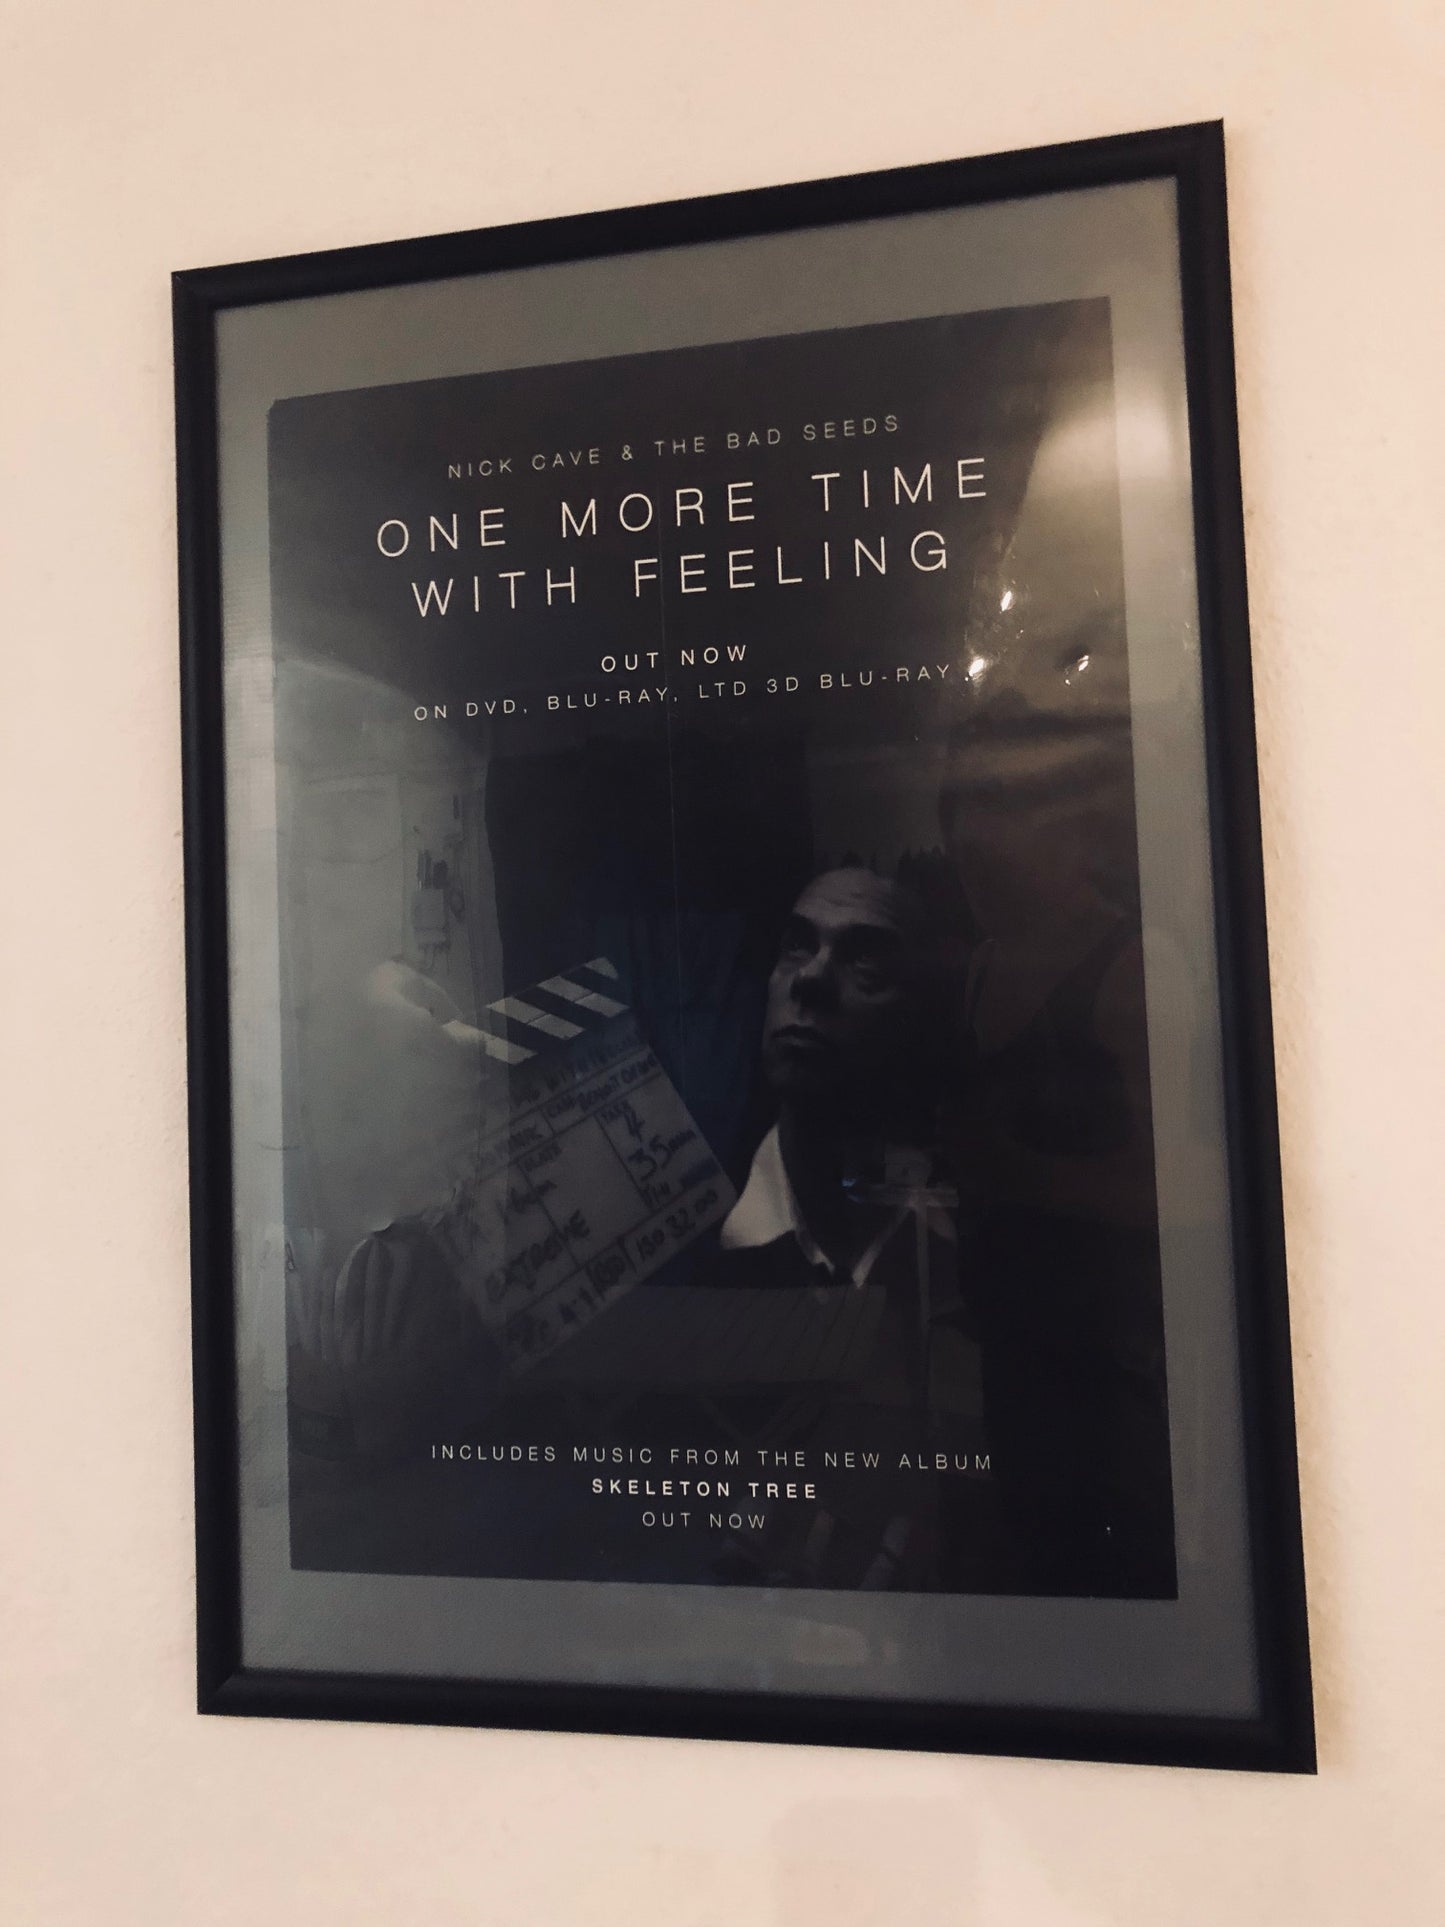 Cave, Nick & The Bad Seeds - One More Time With Feeling - Poster